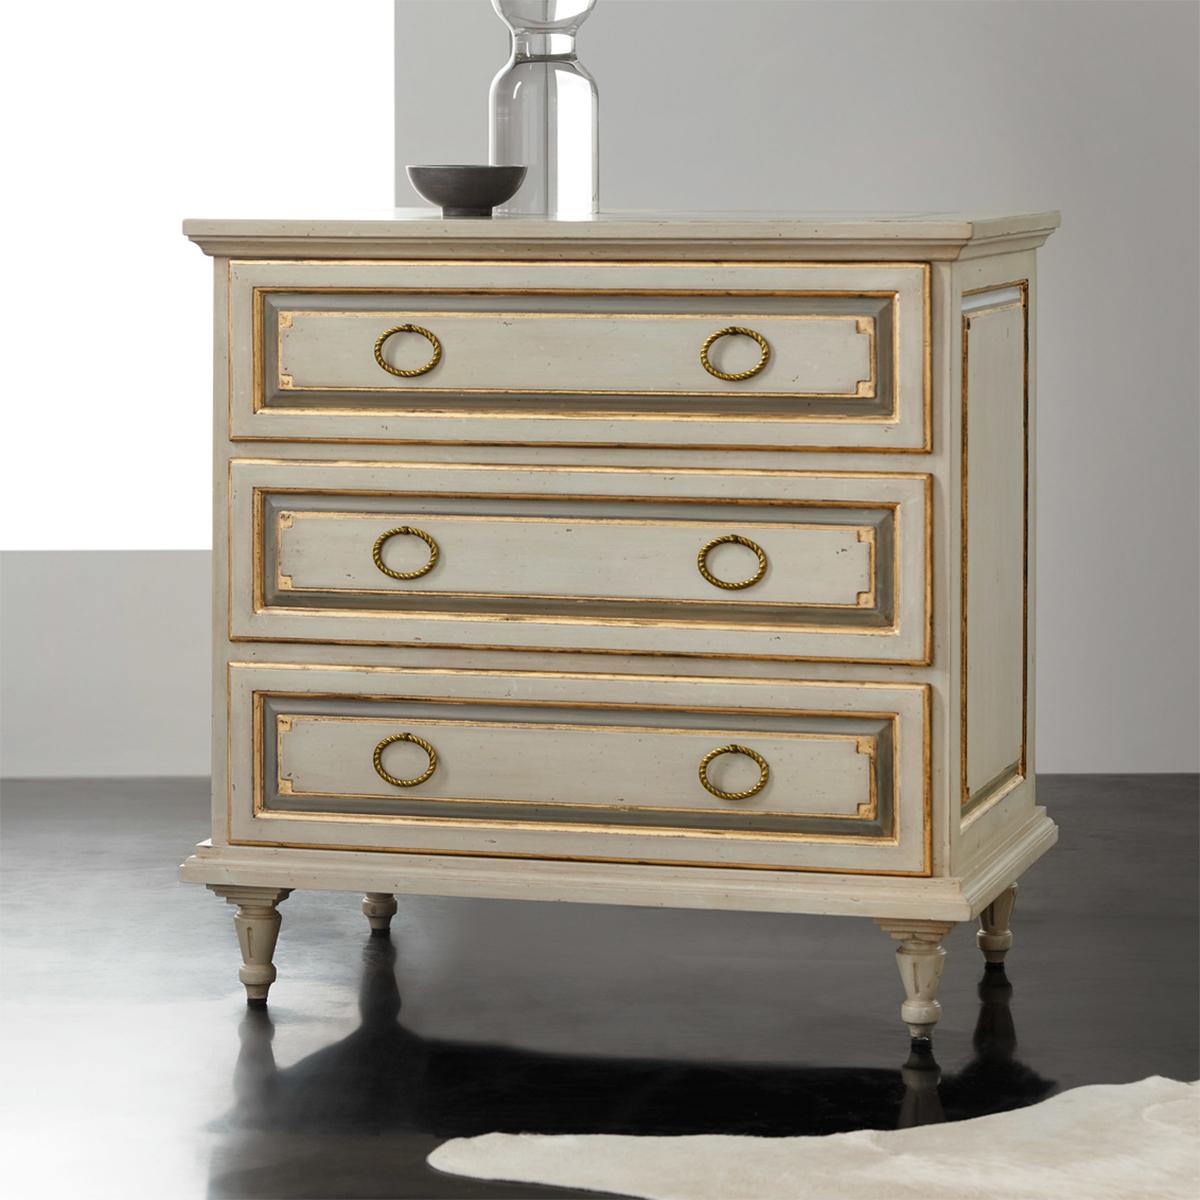 Pair of French Provincial Painted Nightstands. This French Directoire style provincial bedside commode has an antiqued hand-painted finish with a rectangular molded top above three long paneled drawers with gilded trim, with paneled sides also with